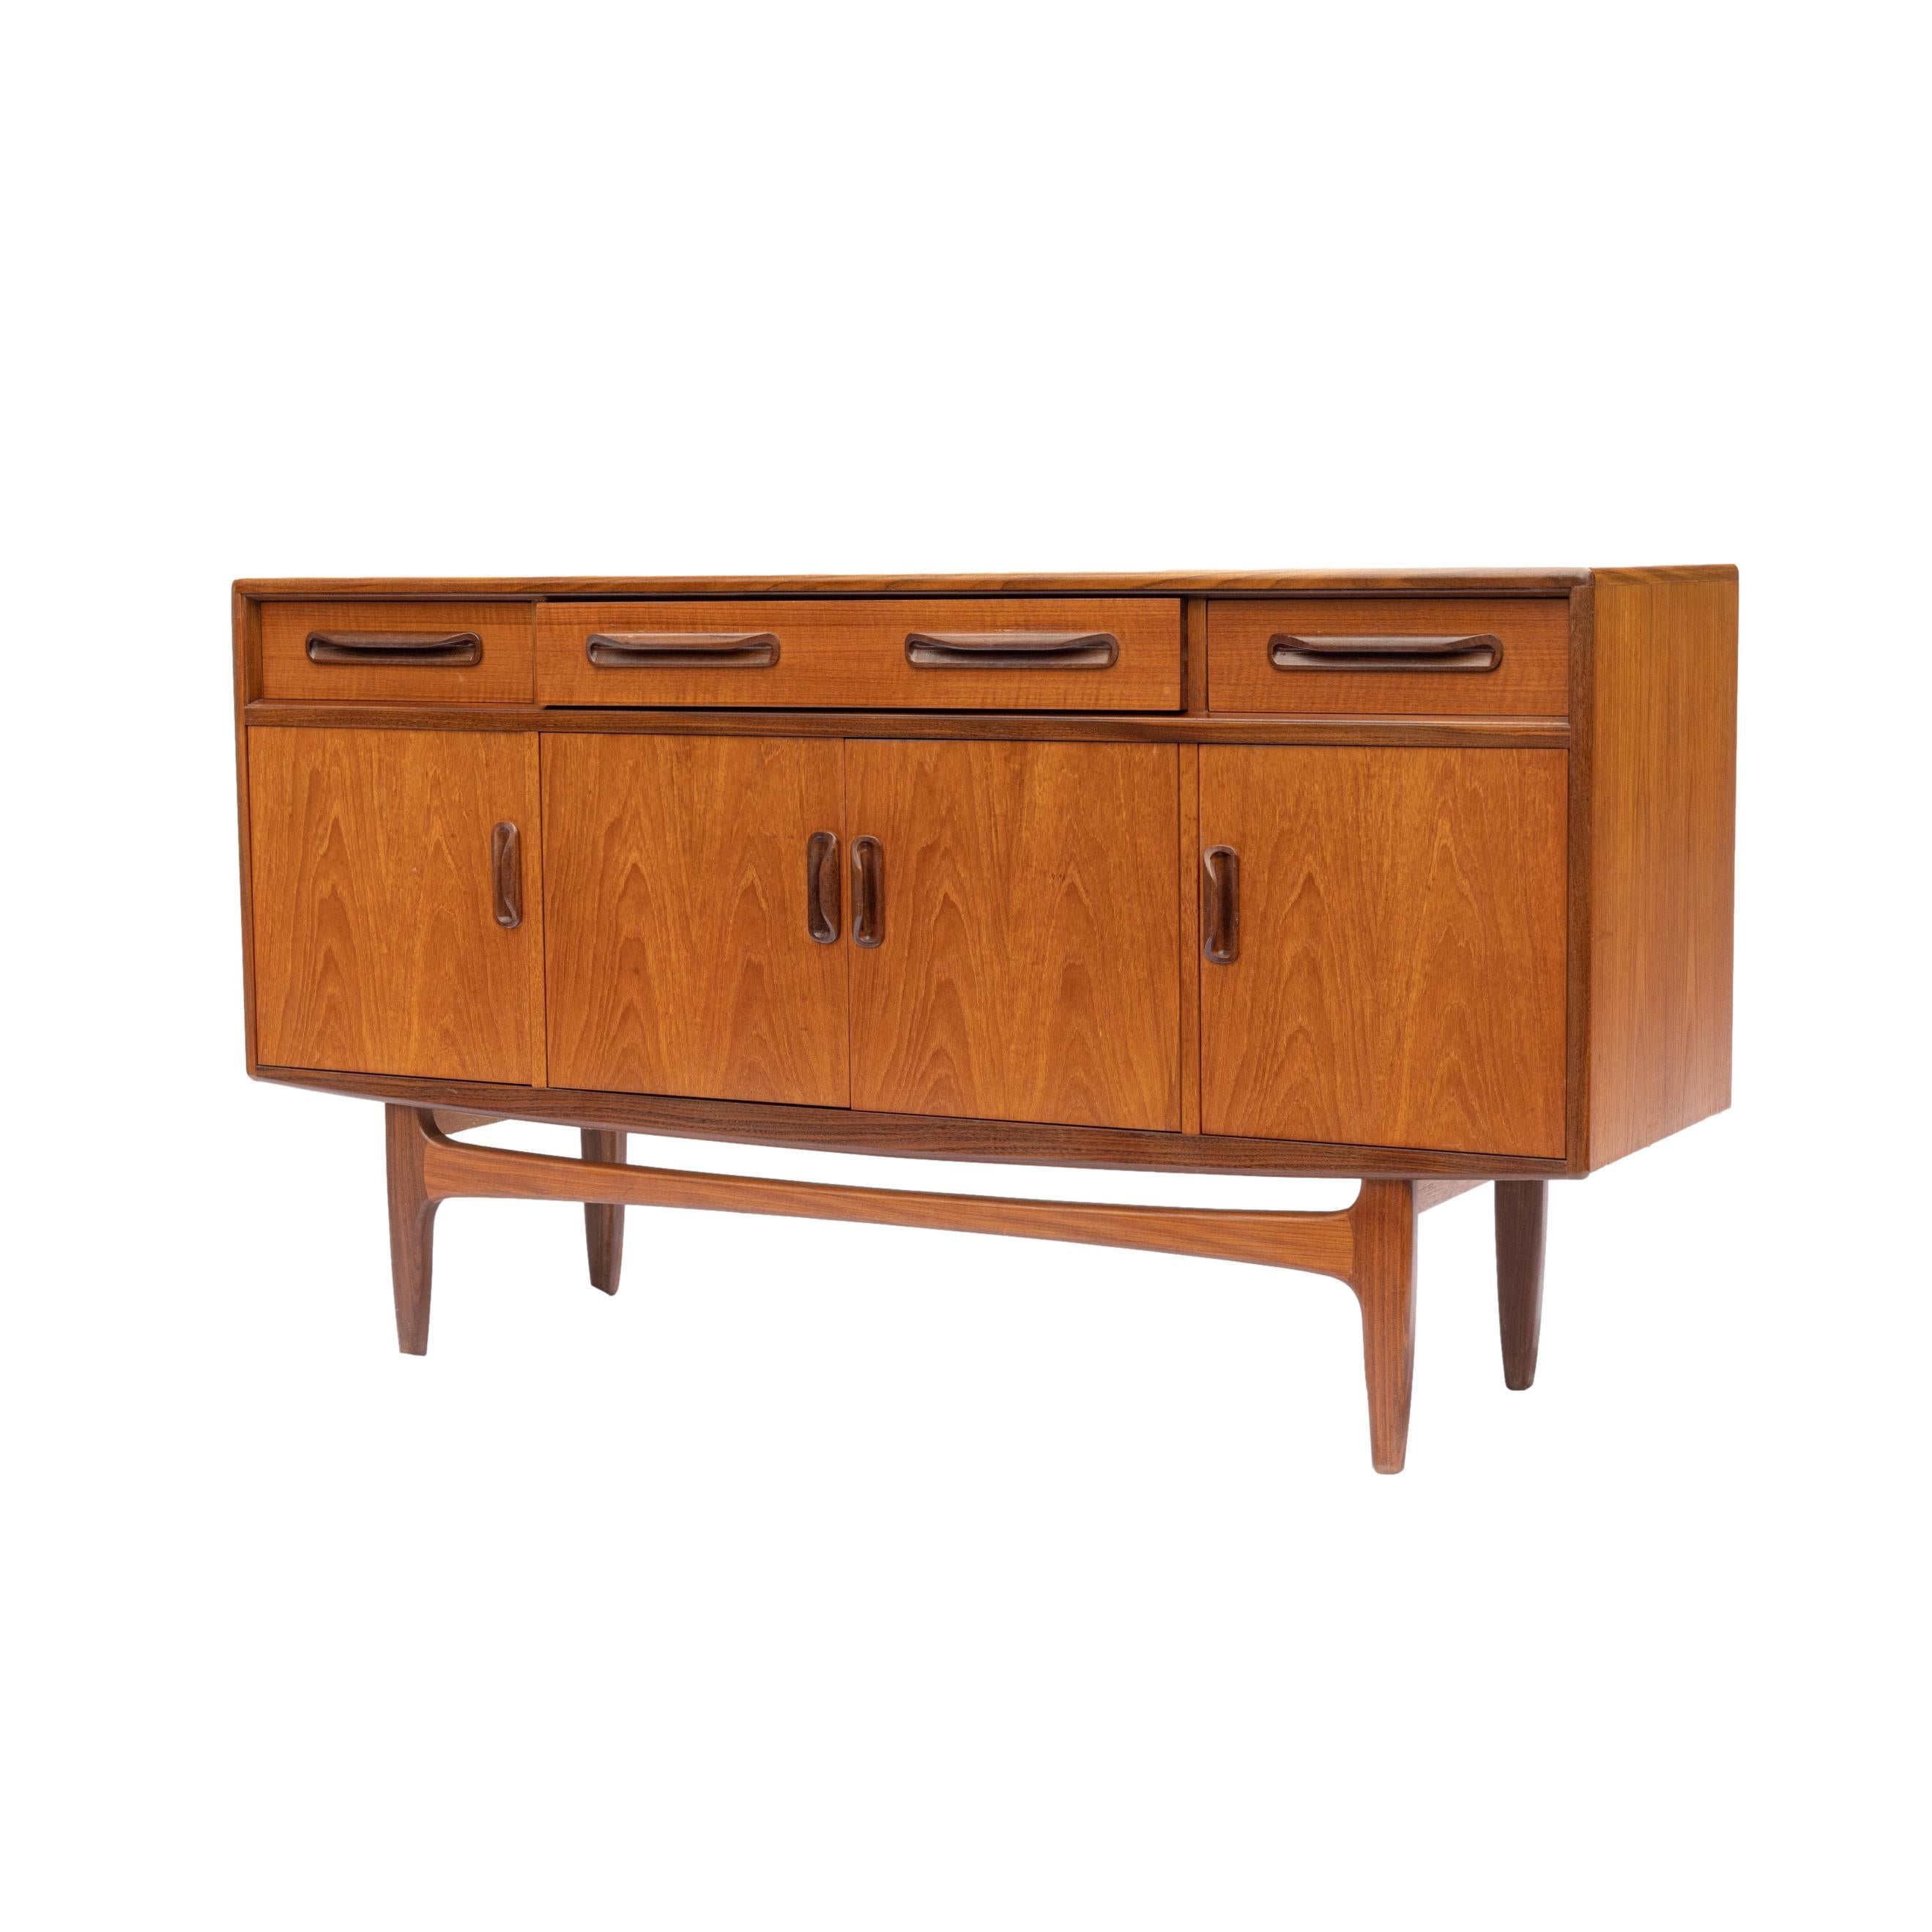 Mid-Century Modern teak Fresco sideboard designed by Victor Wilkins for G Plan, English, ca. 1960, with three frieze drawers, one long with fitted interior and two short, above four open cabinet doors; all with molded sculptural handles, on a Danish